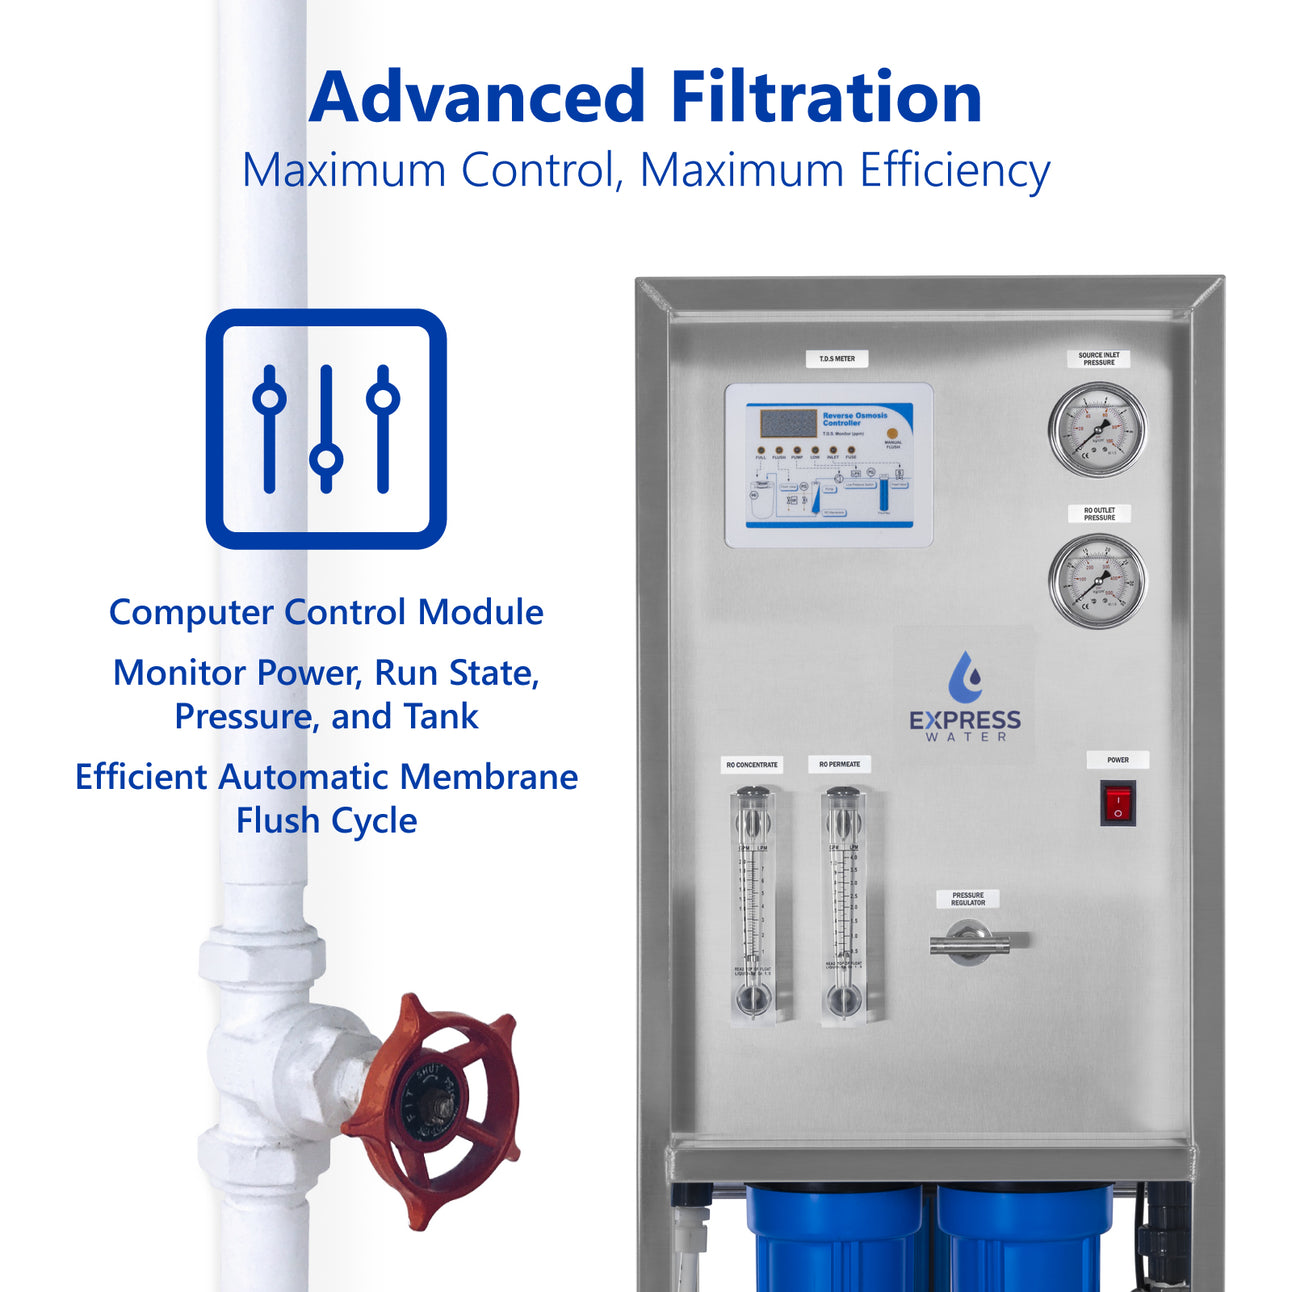 2000 GPD Commercial Reverse Osmosis Water Filtration System – 3 Stage High Capacity RO Filtration – Includes Pump, Gauges, Membrane - dev-express-water